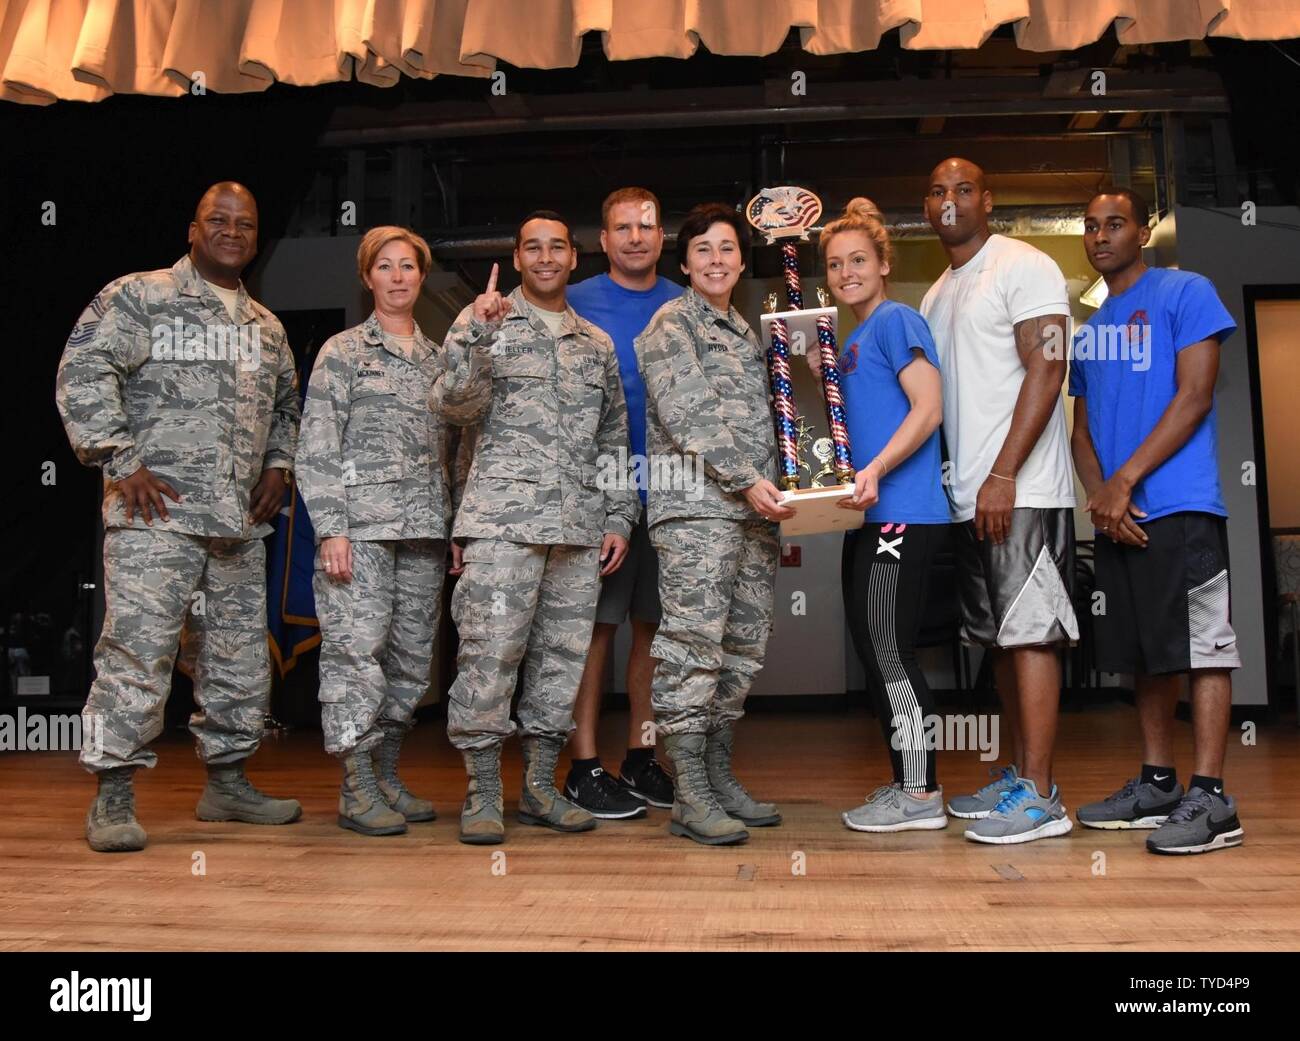 Members of the 81st Dental Squadron are presented the first place trophy by Col. Jeannine Ryder, 81st Medical Group commander, during the 81st MDG Push-up Competition at the Keesler Medical Center Don Wylie Auditorium Nov. 1, 2016, on Keesler Air Force Base, Miss. Seven five-person teams competed in the event pushing out a total of 6,272 push-ups. The 81st Dental Squadron accumulated 1,127 push-ups. The Airmen who participated in the event raised money to support the Krewe of Medics Mardi Gras Ball. Stock Photo